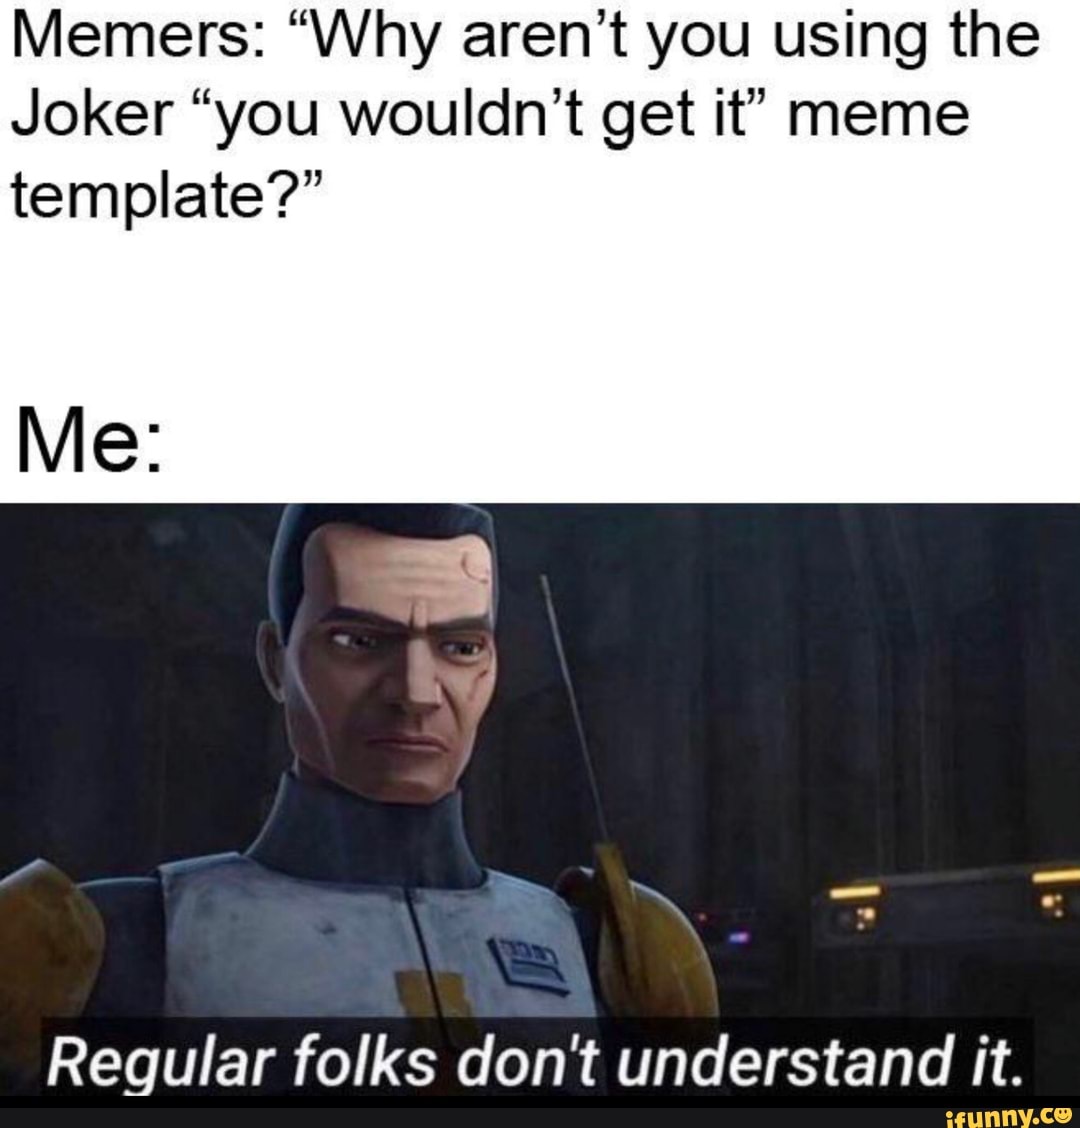 Memers "Why aren't you using the Joker "you wouldn't get it" meme